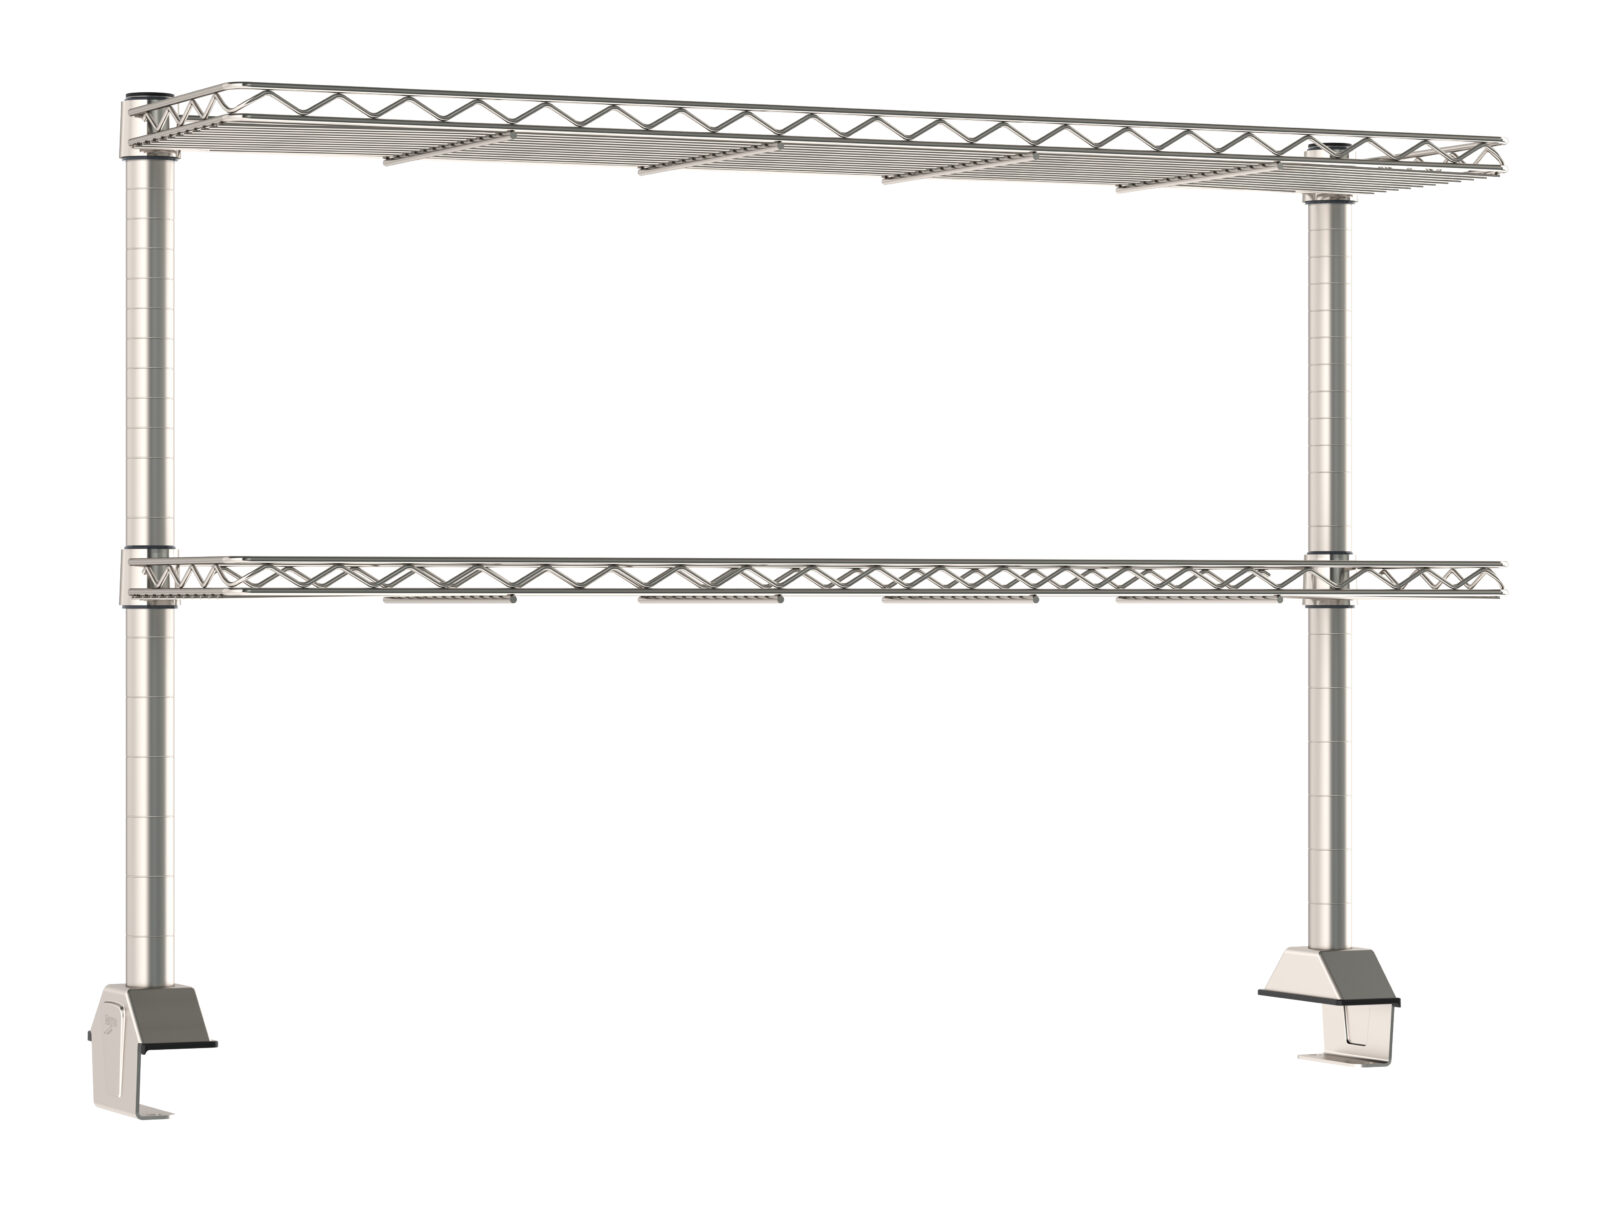 Metro Tableworx 2 Rear Cantilever Stainless Steel Wire Shelf Risers